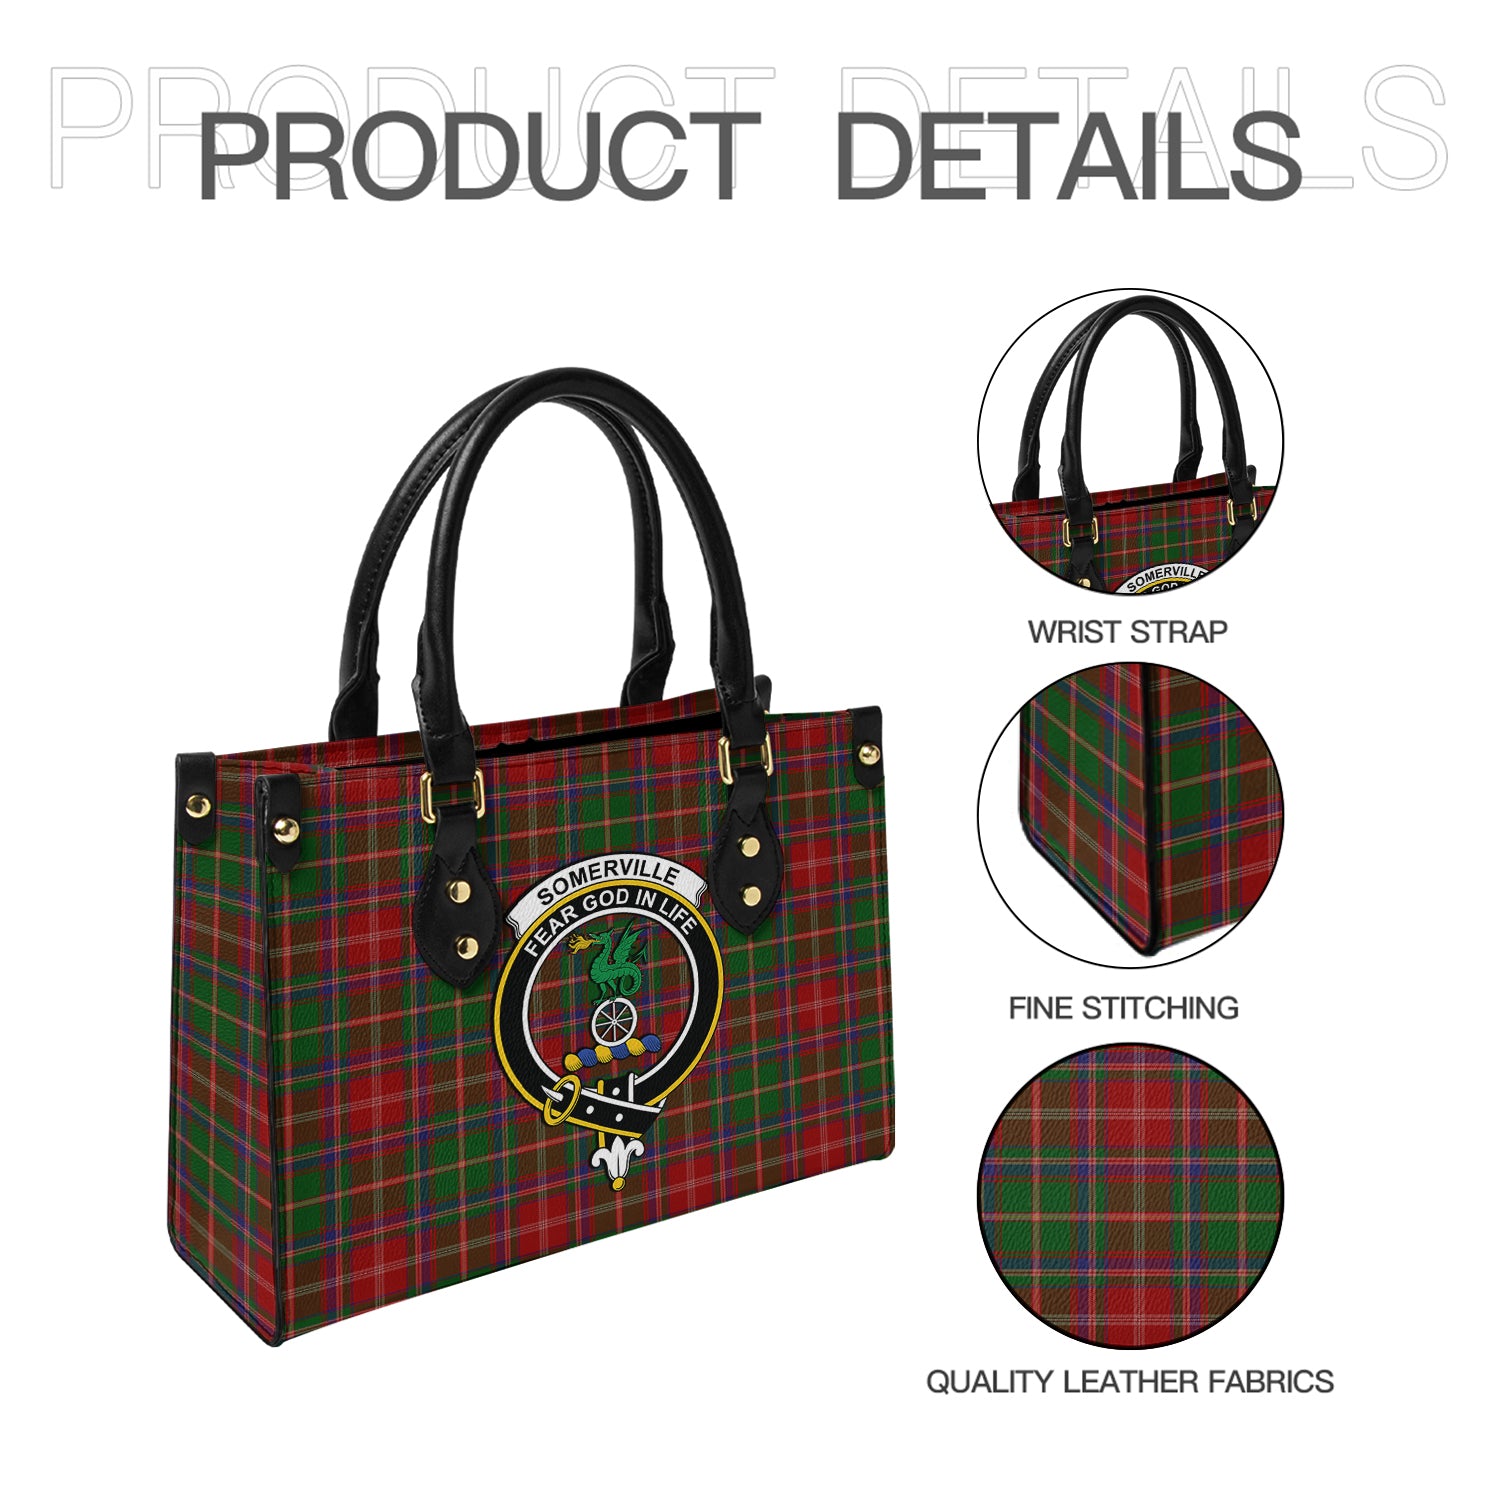 somerville-tartan-leather-bag-with-family-crest